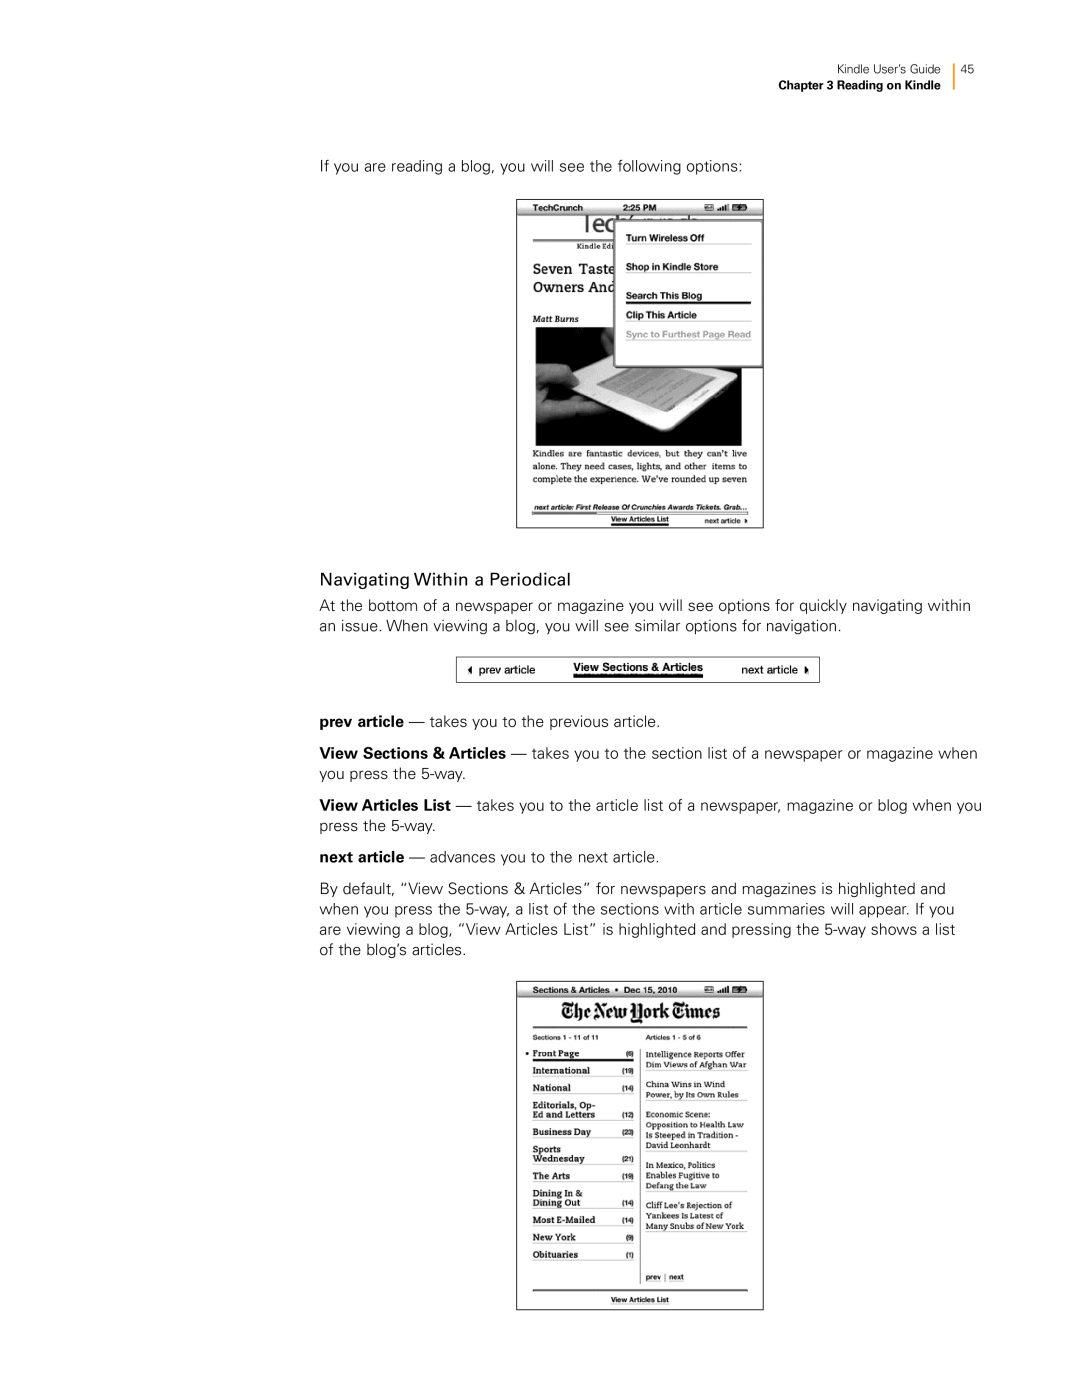 Amazon KNDKYBRD3G manual Navigating Within a Periodical 